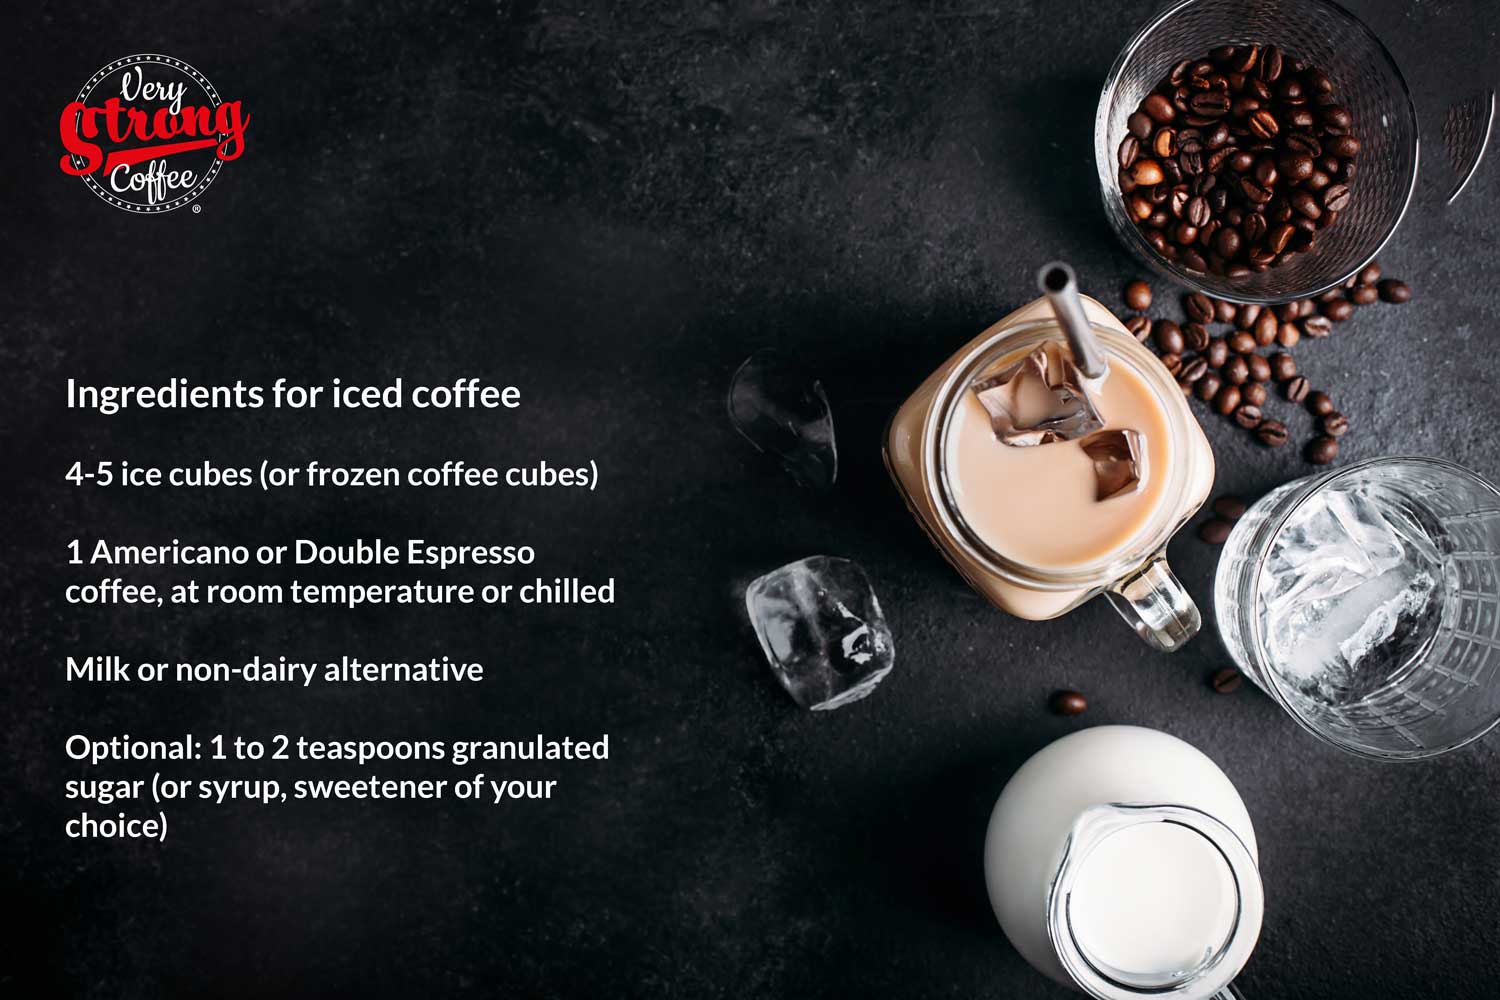 ingredients for making iced coffee at home with very strong coffee